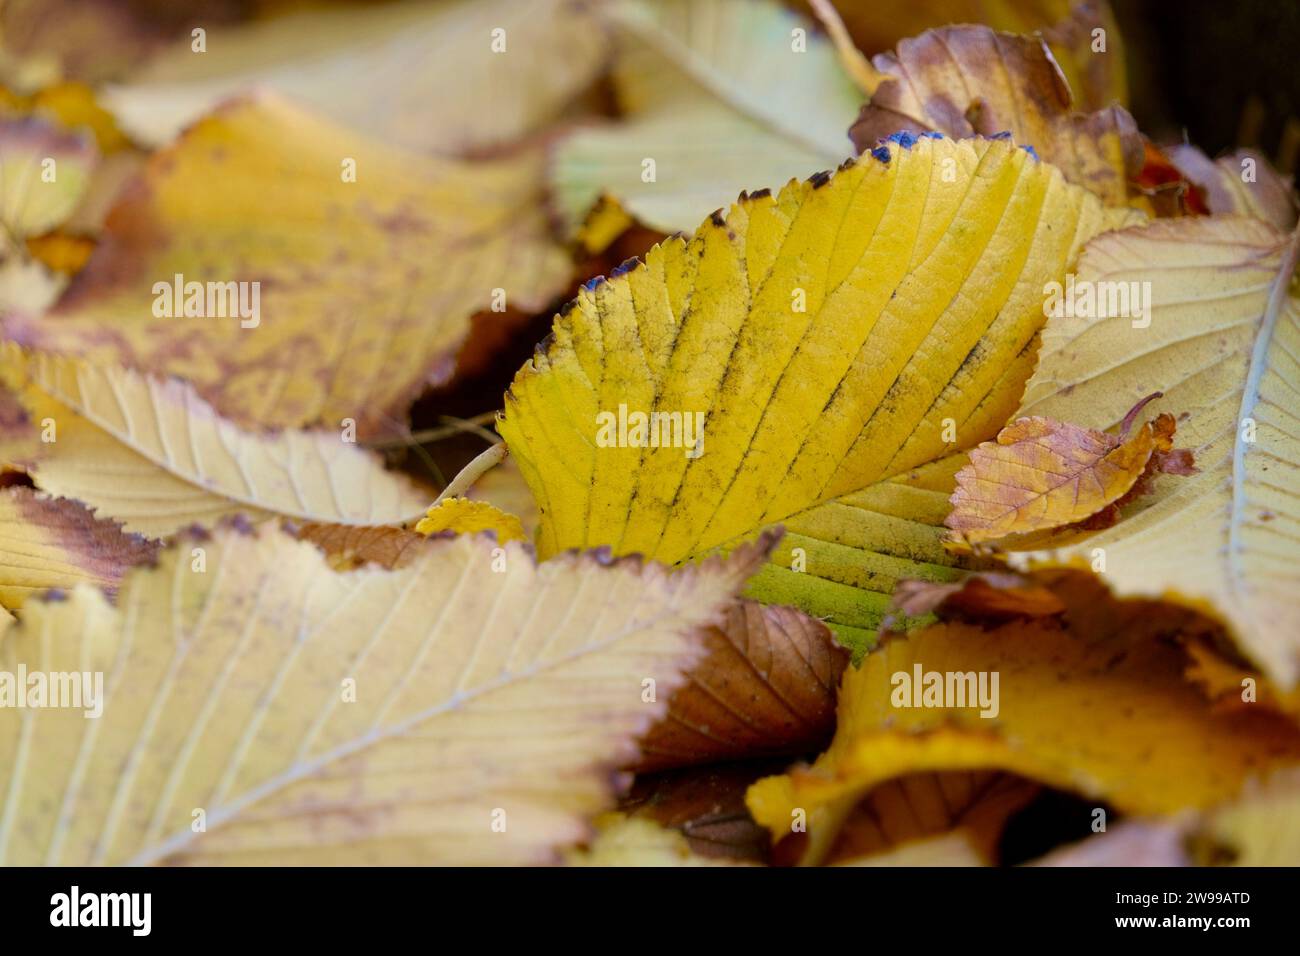 A close up of an autumnal scene with vibrant yellow, orange and brown leaves scattered on the ground Stock Photo